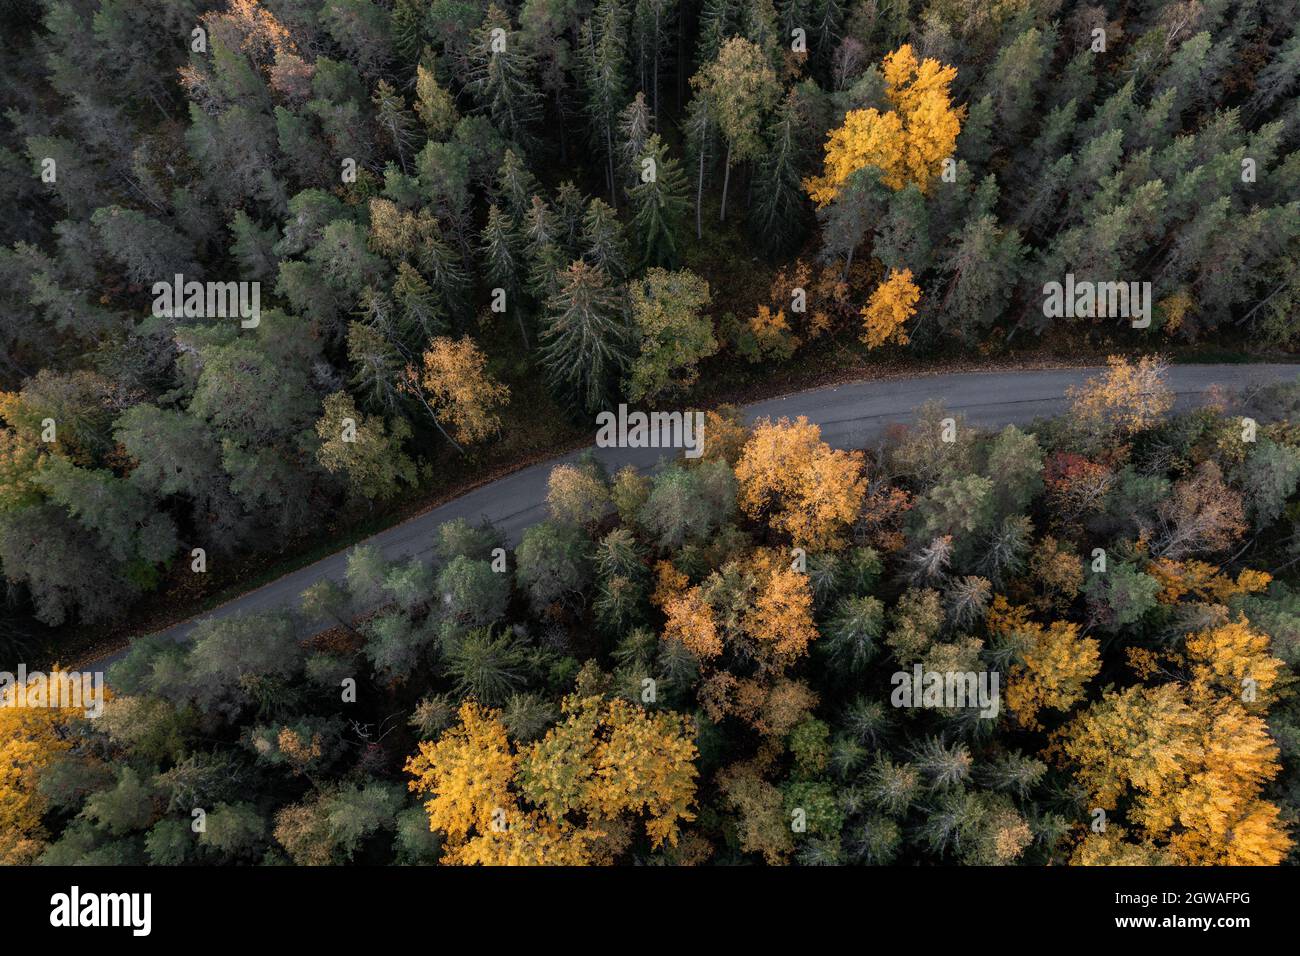 Autumn colors of yellow trees and a road in the forest. Stock Photo